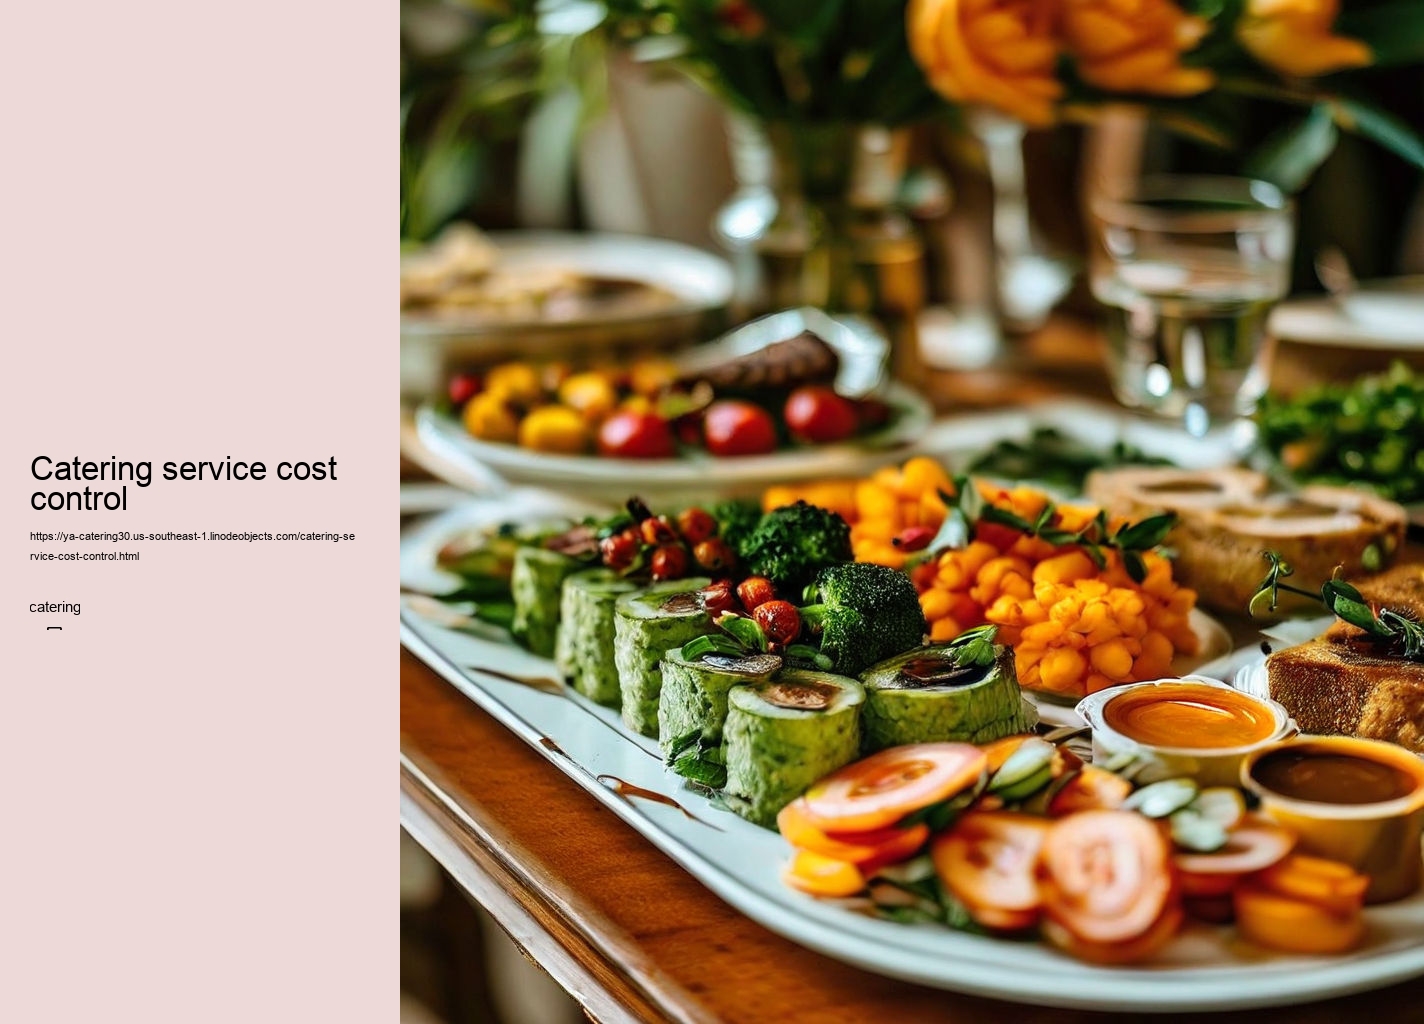 Catering service cost control